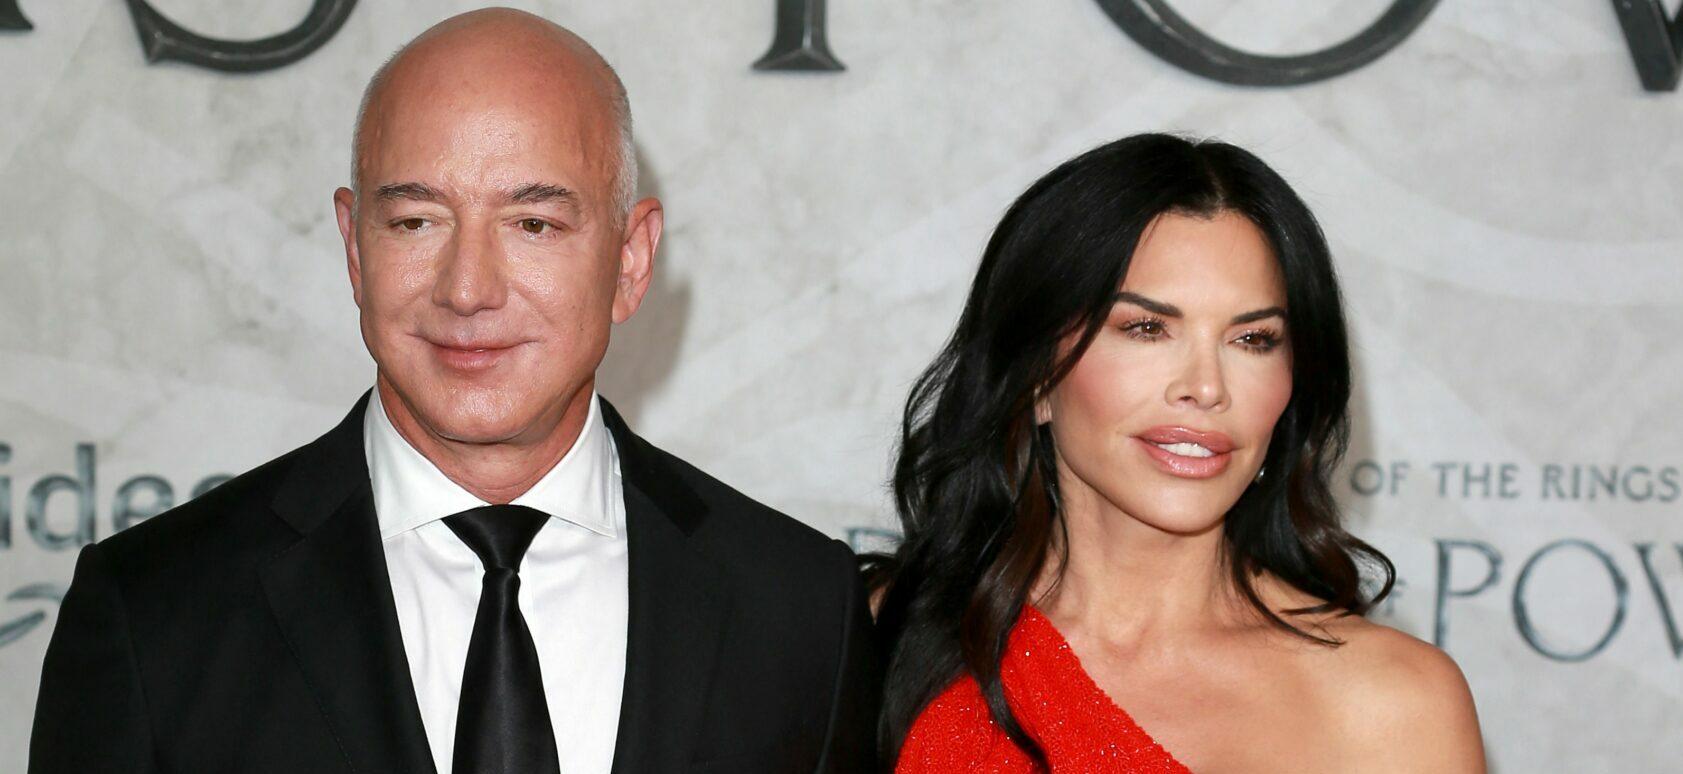 Jeff Bezos and Lauren Sanchez at the World Premiere Of "The Lord Of The Rings: The Rings Of Power" In London.